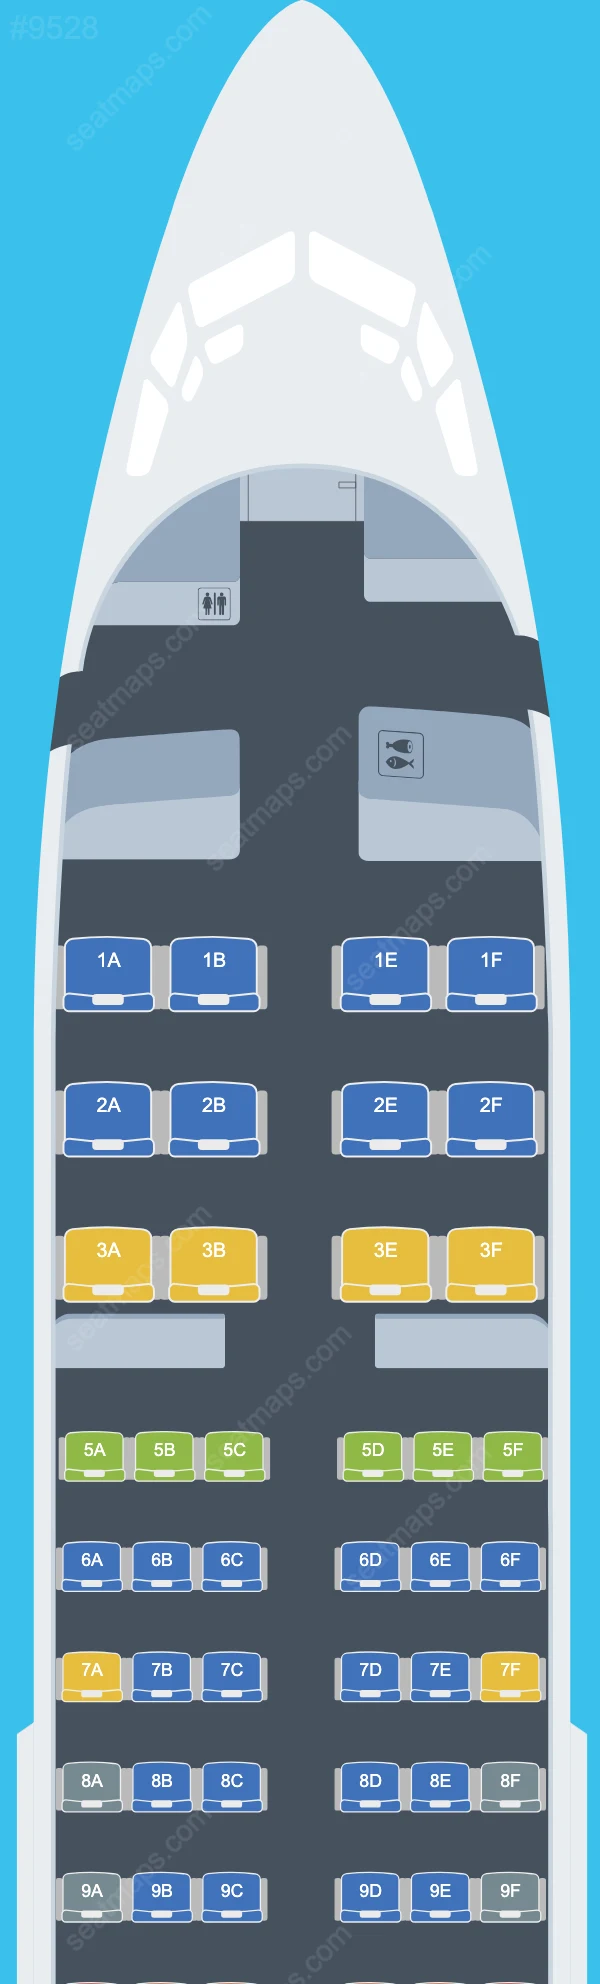 Copa Airlines Boeing 737 aircraft seat map  737-700 V.2